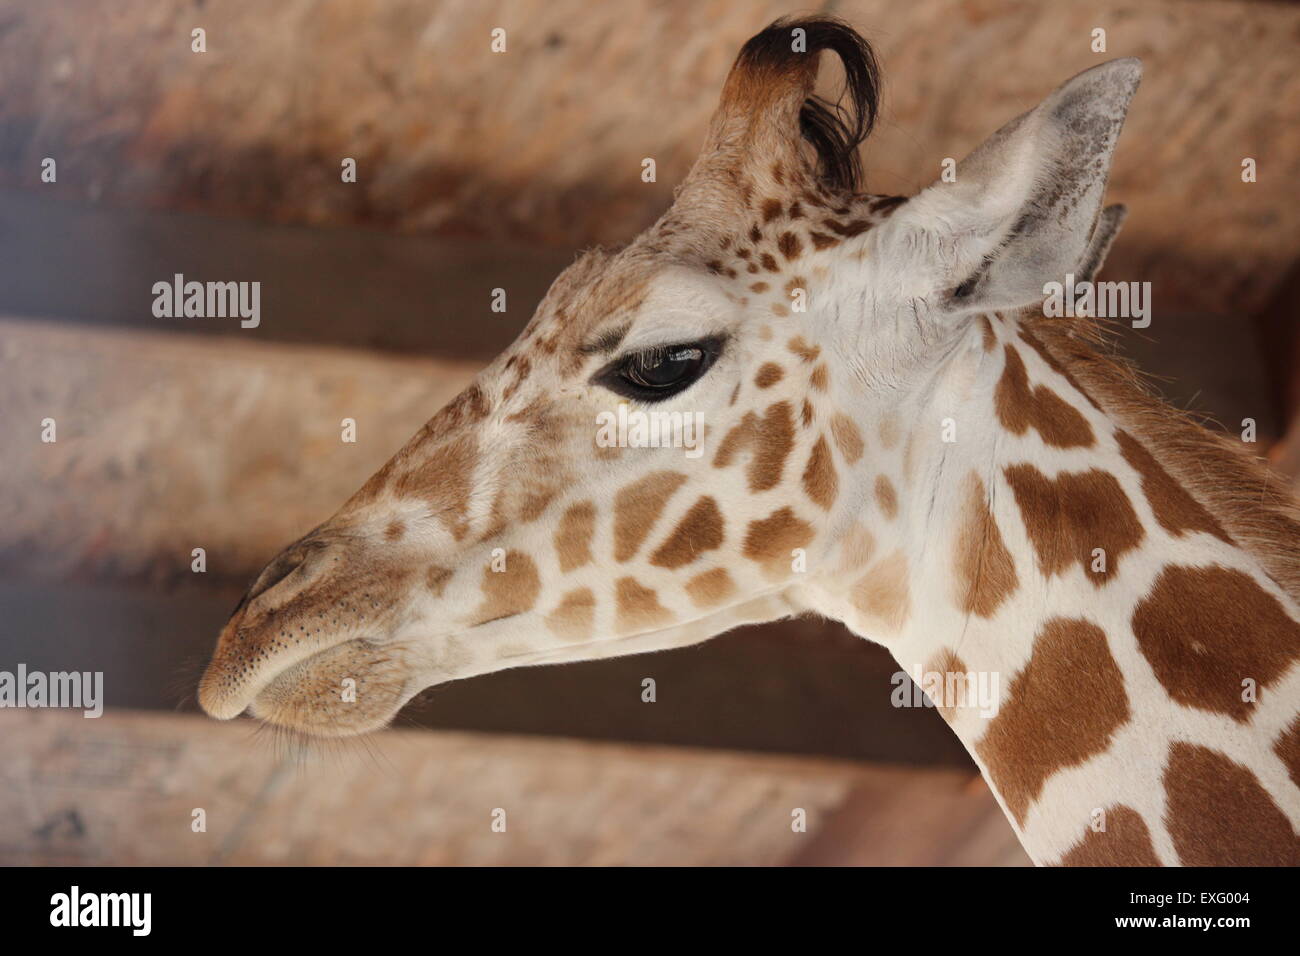 Giraffe posing for a picture. Stock Photo